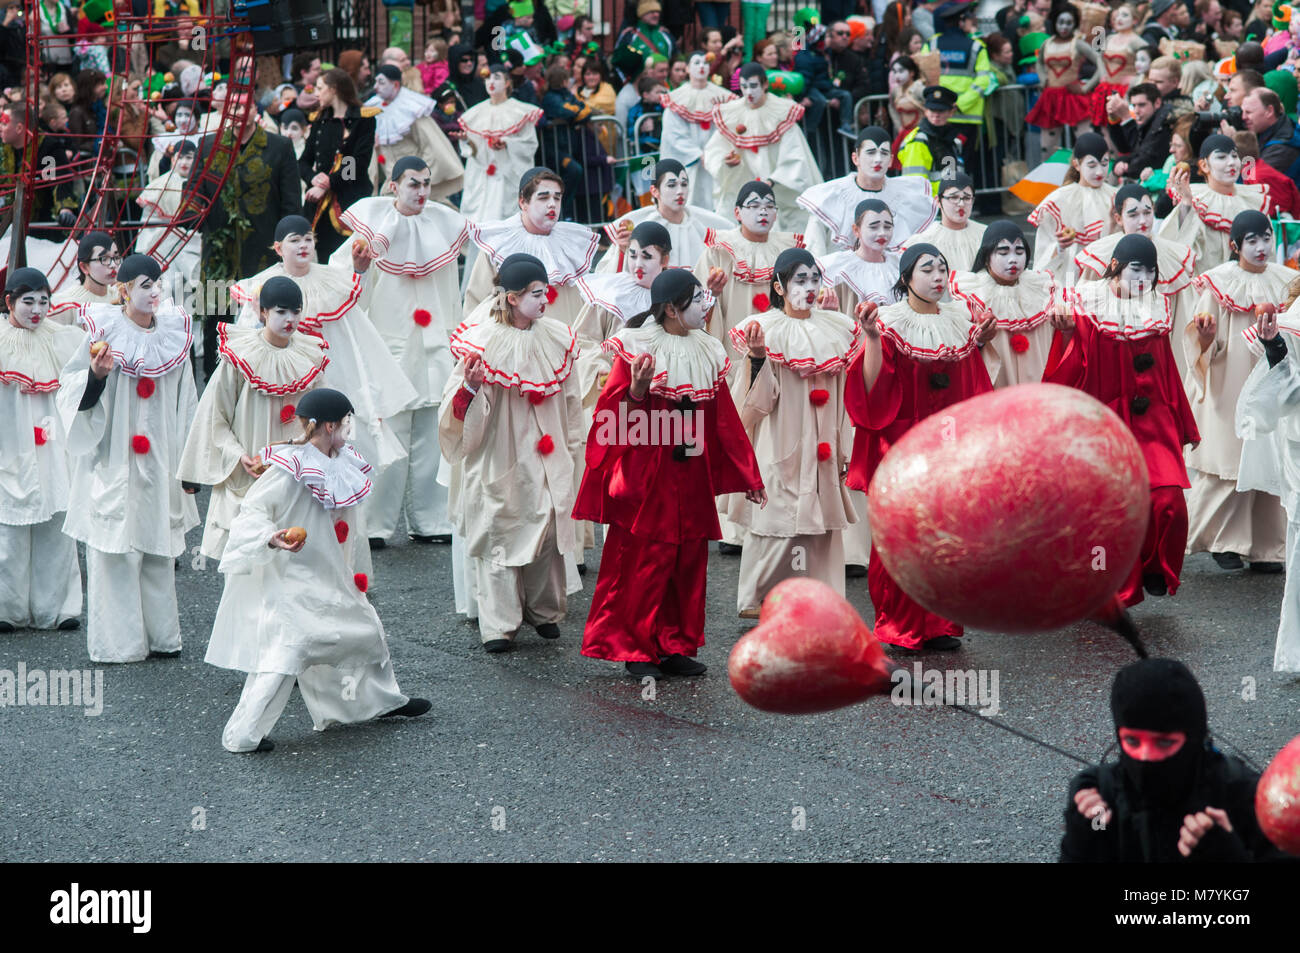 Participants during the parade on the occasion of St. Patrick's Day in Dublin, Ireland Stock Photo